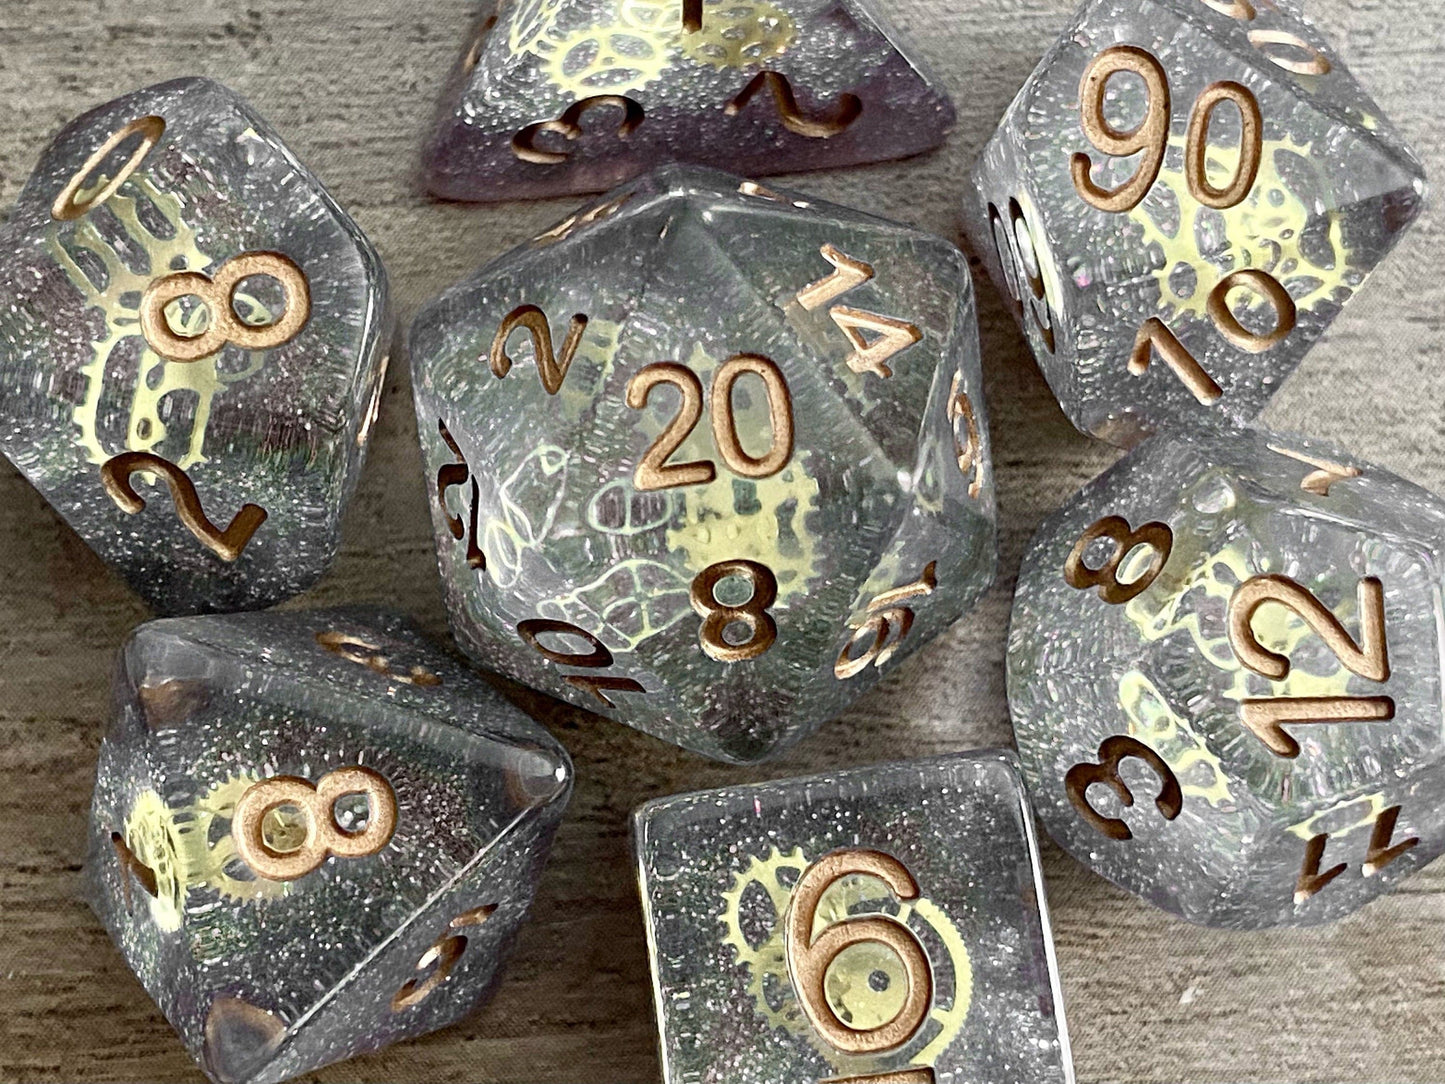 The Crooked Tavern Dice Sets Clockwork RPG Polyhedral Dice Set | Tiny Steampunk Gears and Glitter Inside!